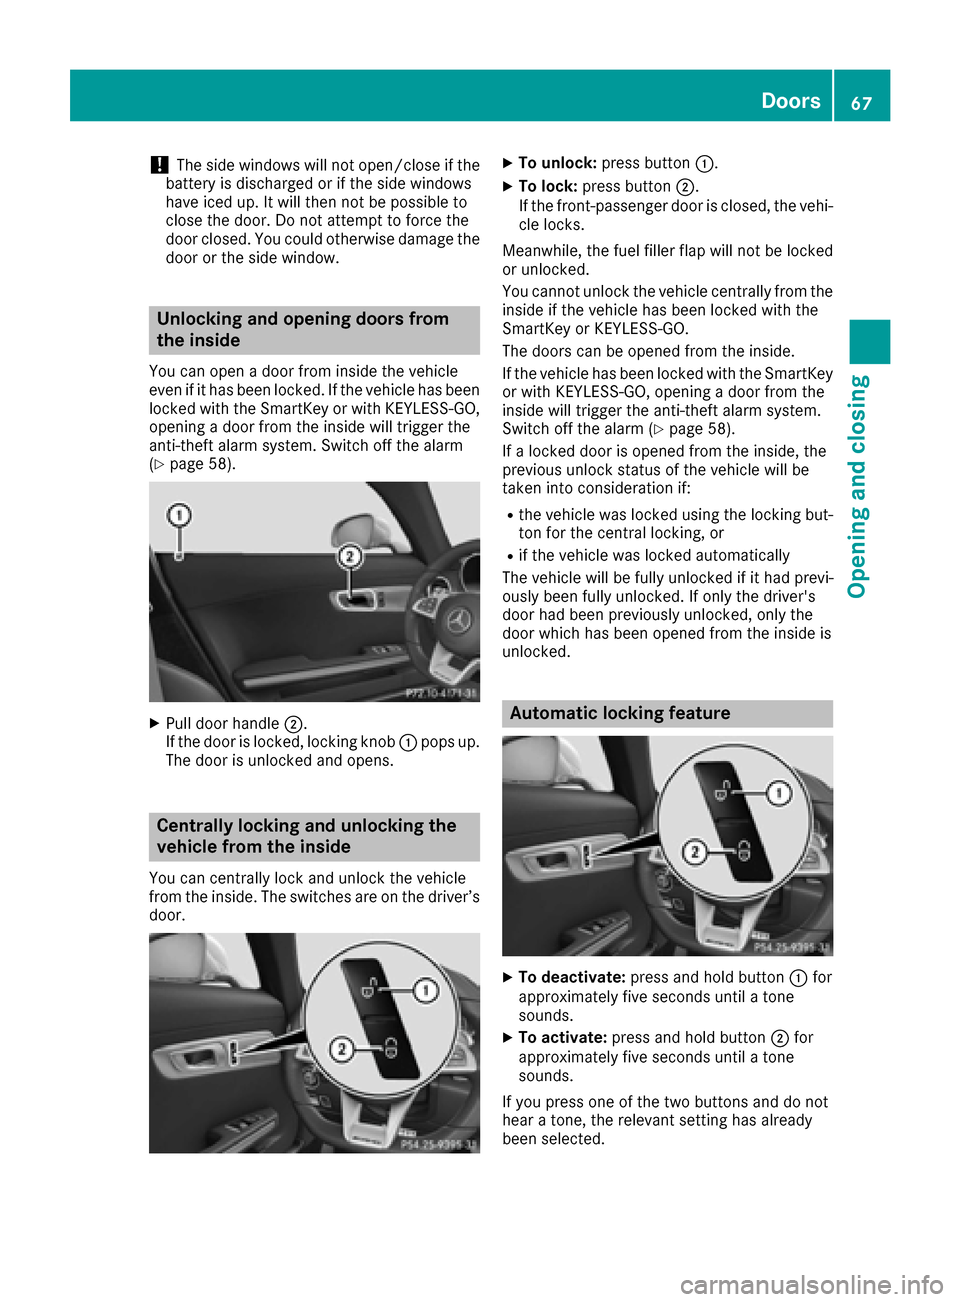 MERCEDES-BENZ AMG GT S 2016 C190 Owners Manual !The side windows will not open/close if the
battery is discharged or if the side windows
have iced up. It will then not be possible to
close the door. Do not attempt to force the
door closed. You cou